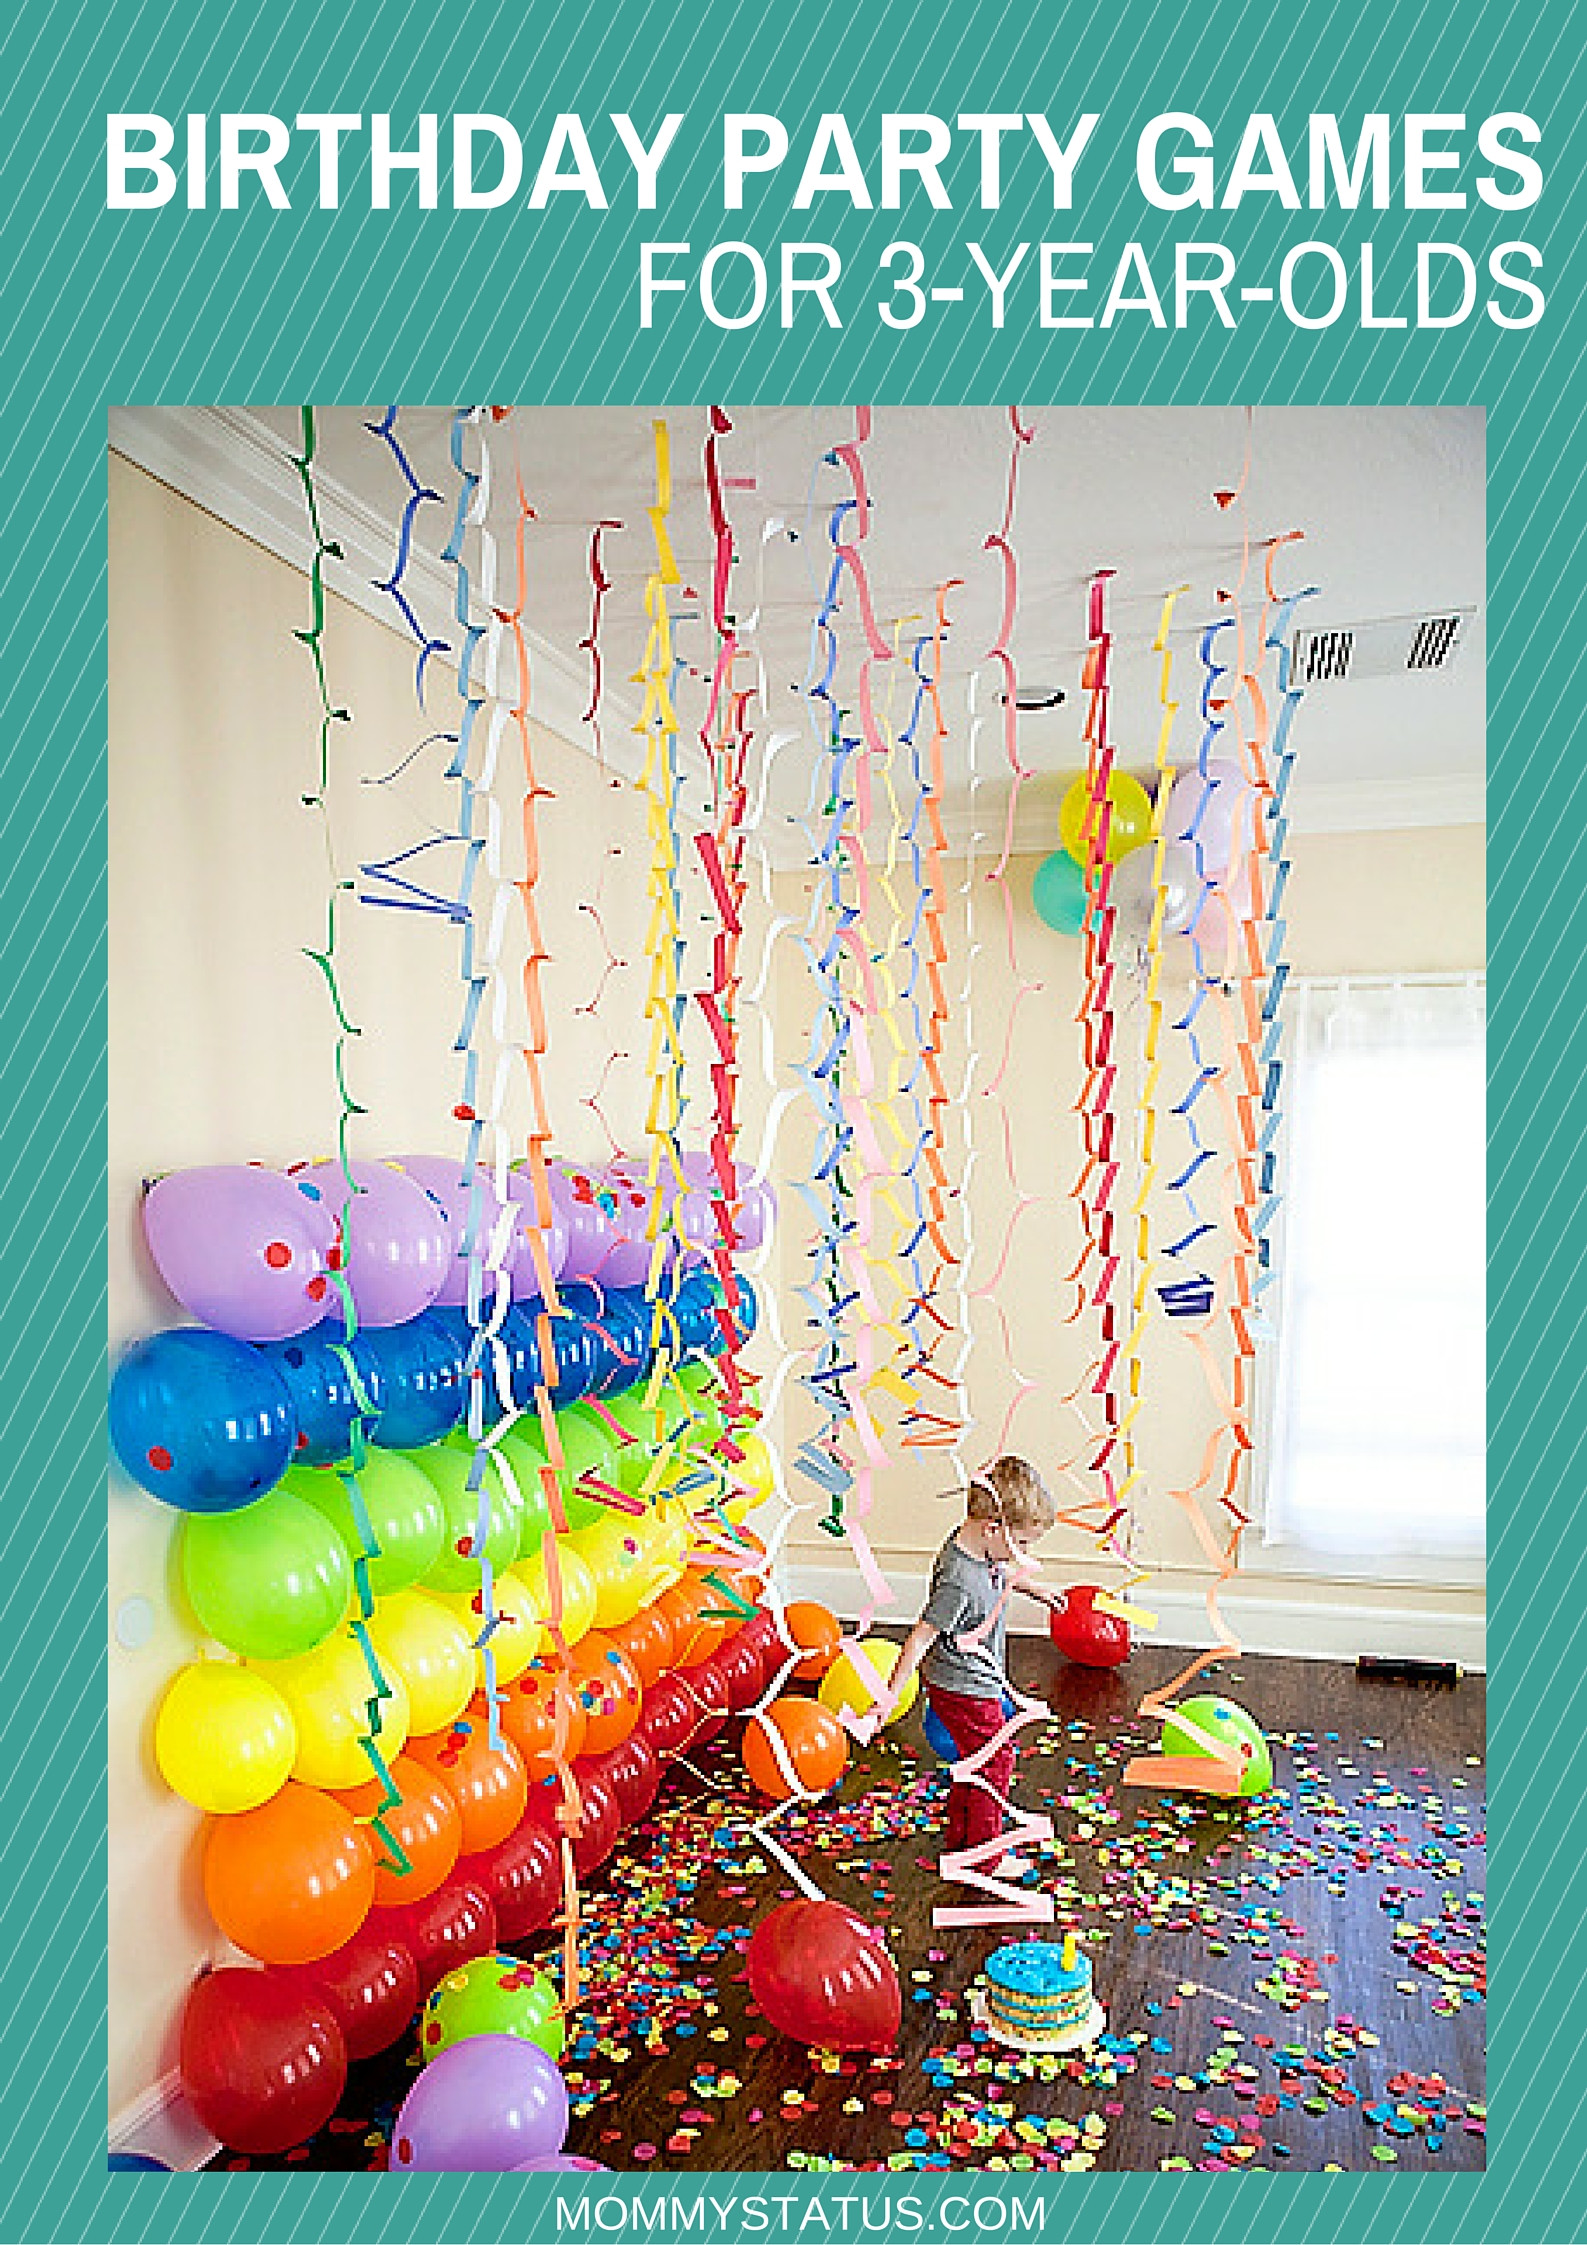 Birthday Party Activities For Kids
 BIRTHDAY PARTY GAMES FOR 3 YEAR OLDS Mommy Status